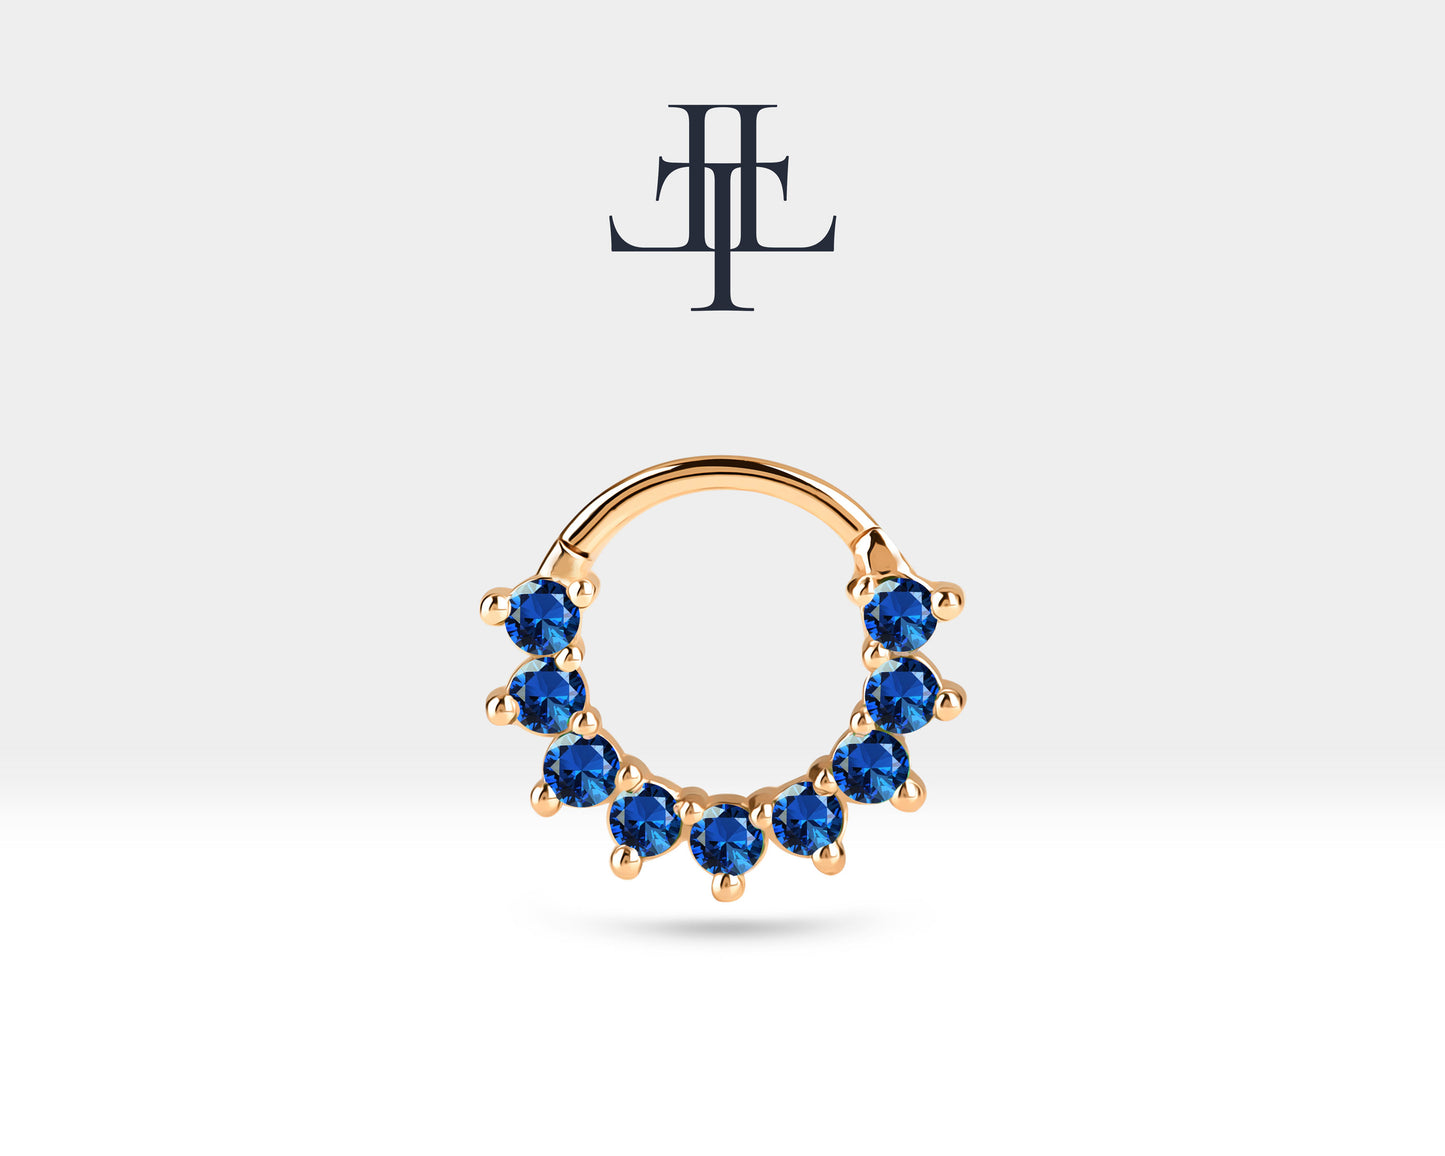 Cartilage Hoop Clicker with Nine Pieces Sapphire,Single Earring,14K Solid Gold,16G(1.2mm)